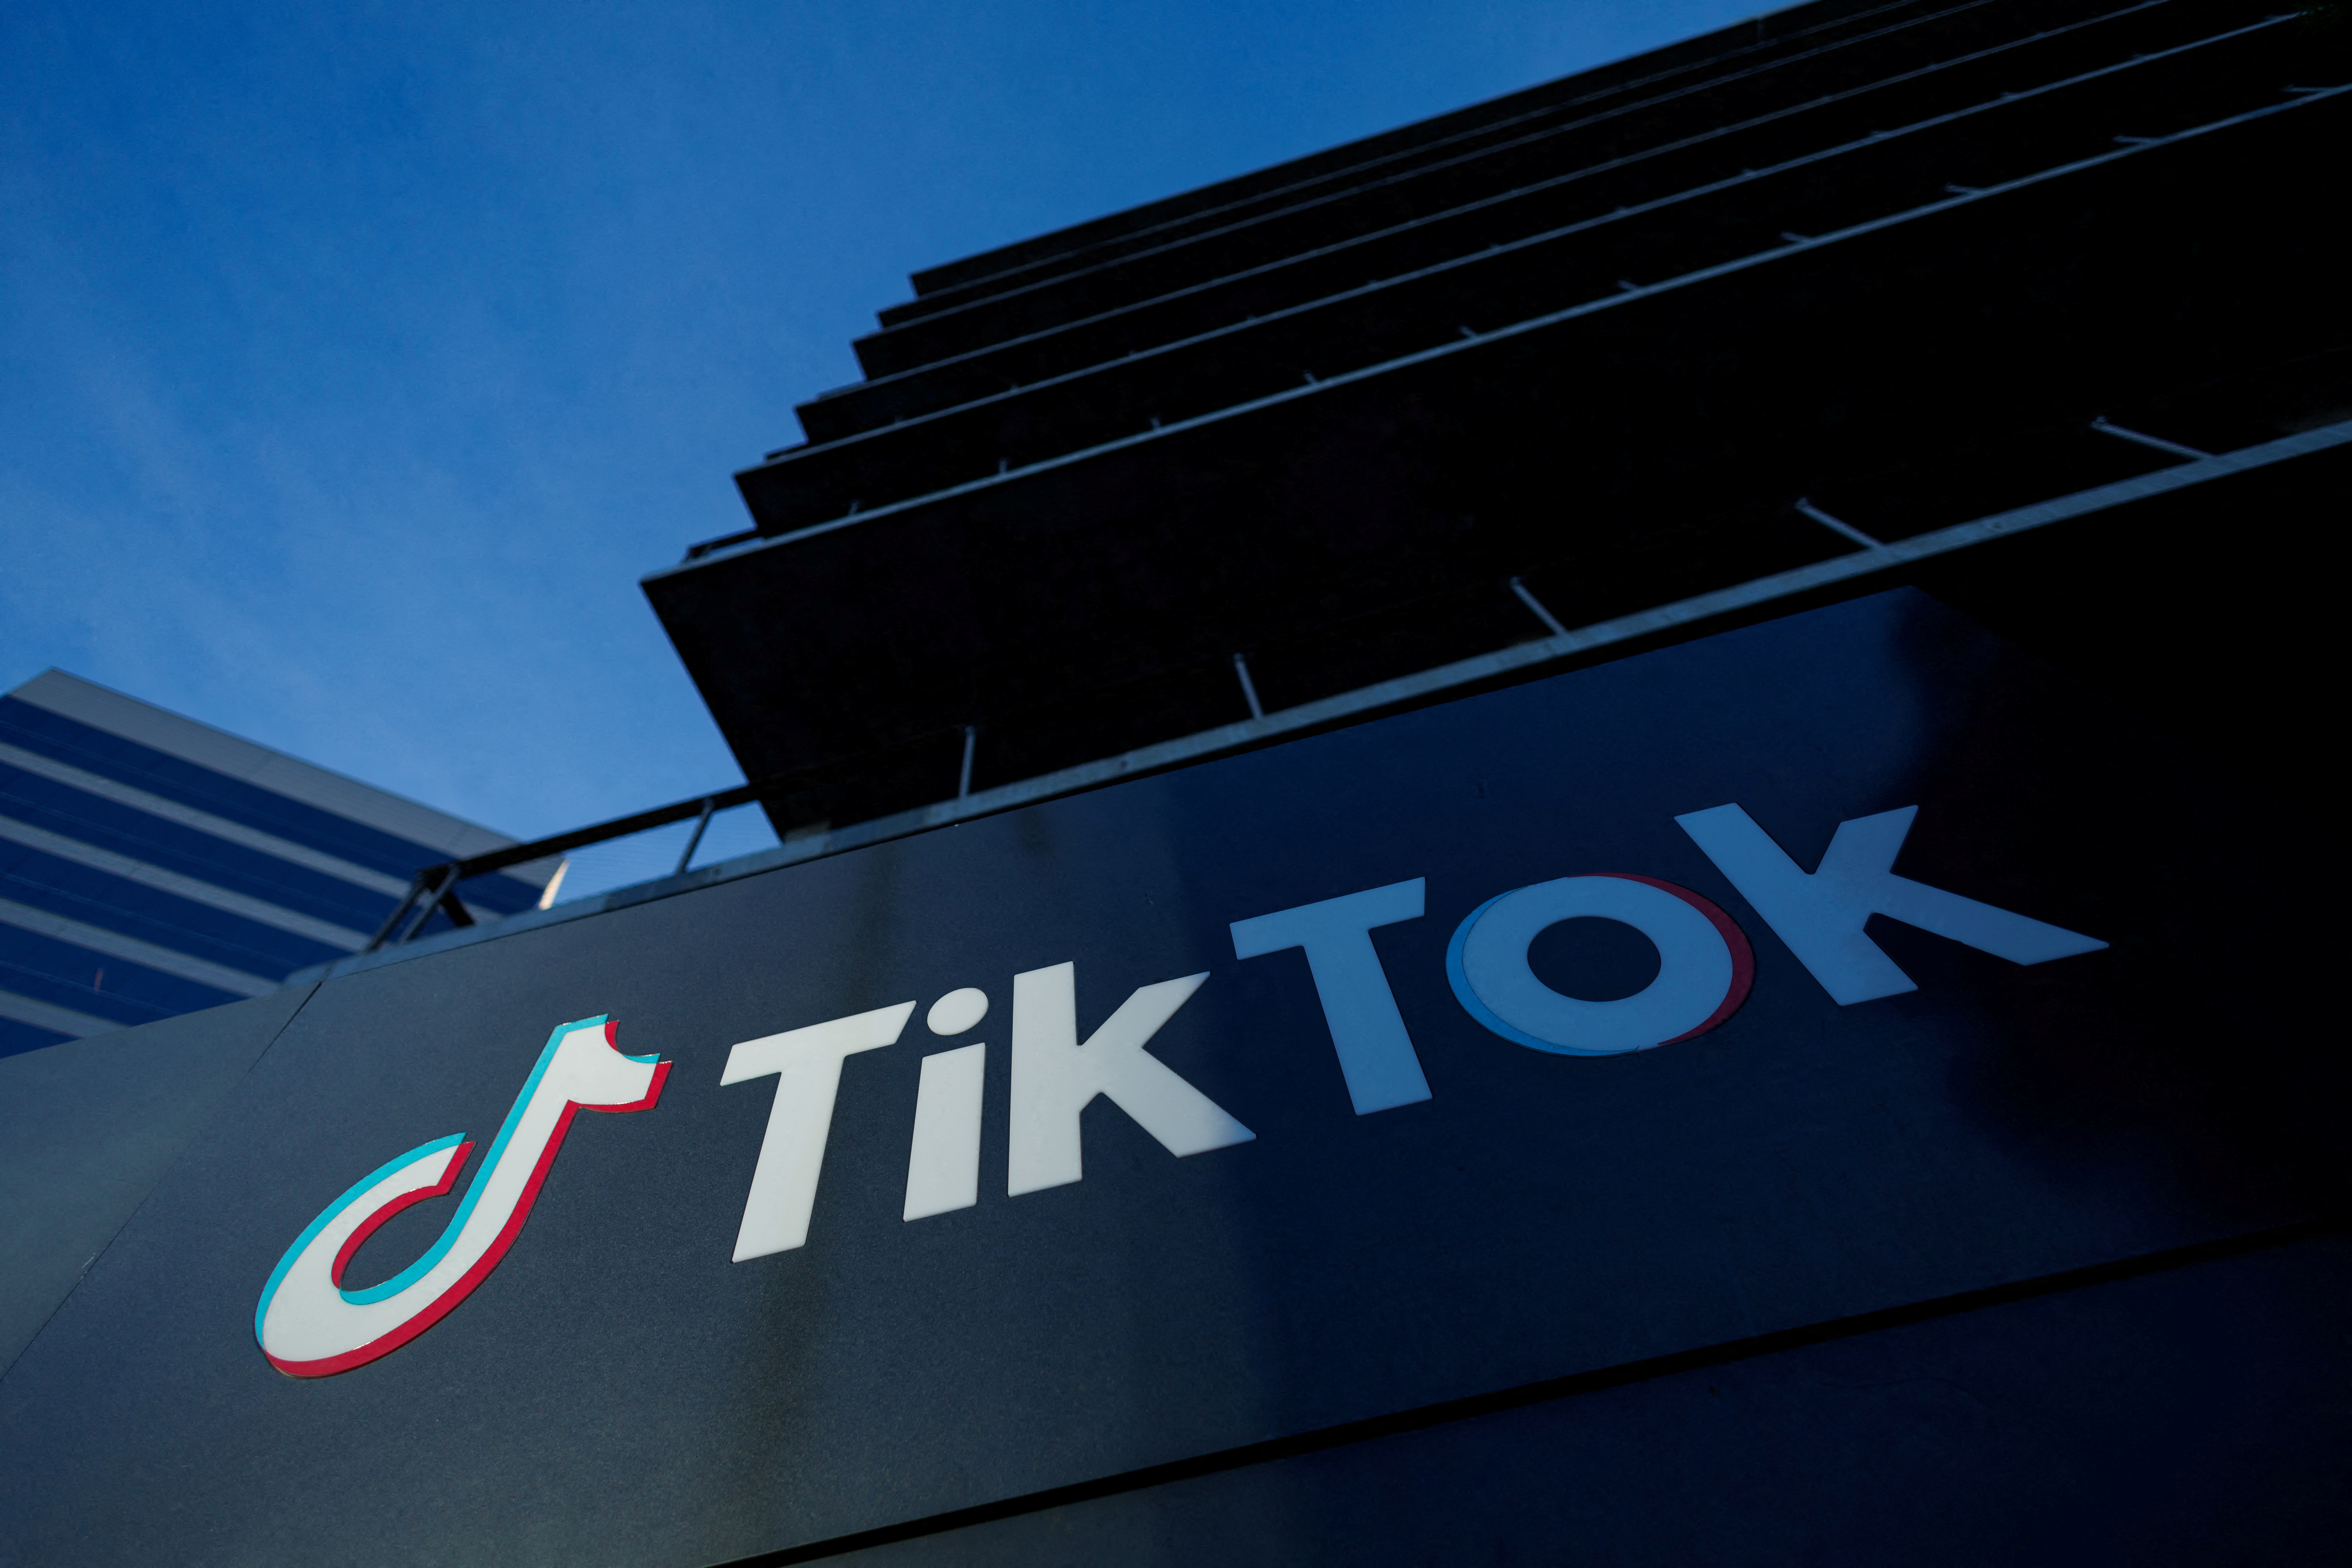 The offices of TikTok in Culver City, California